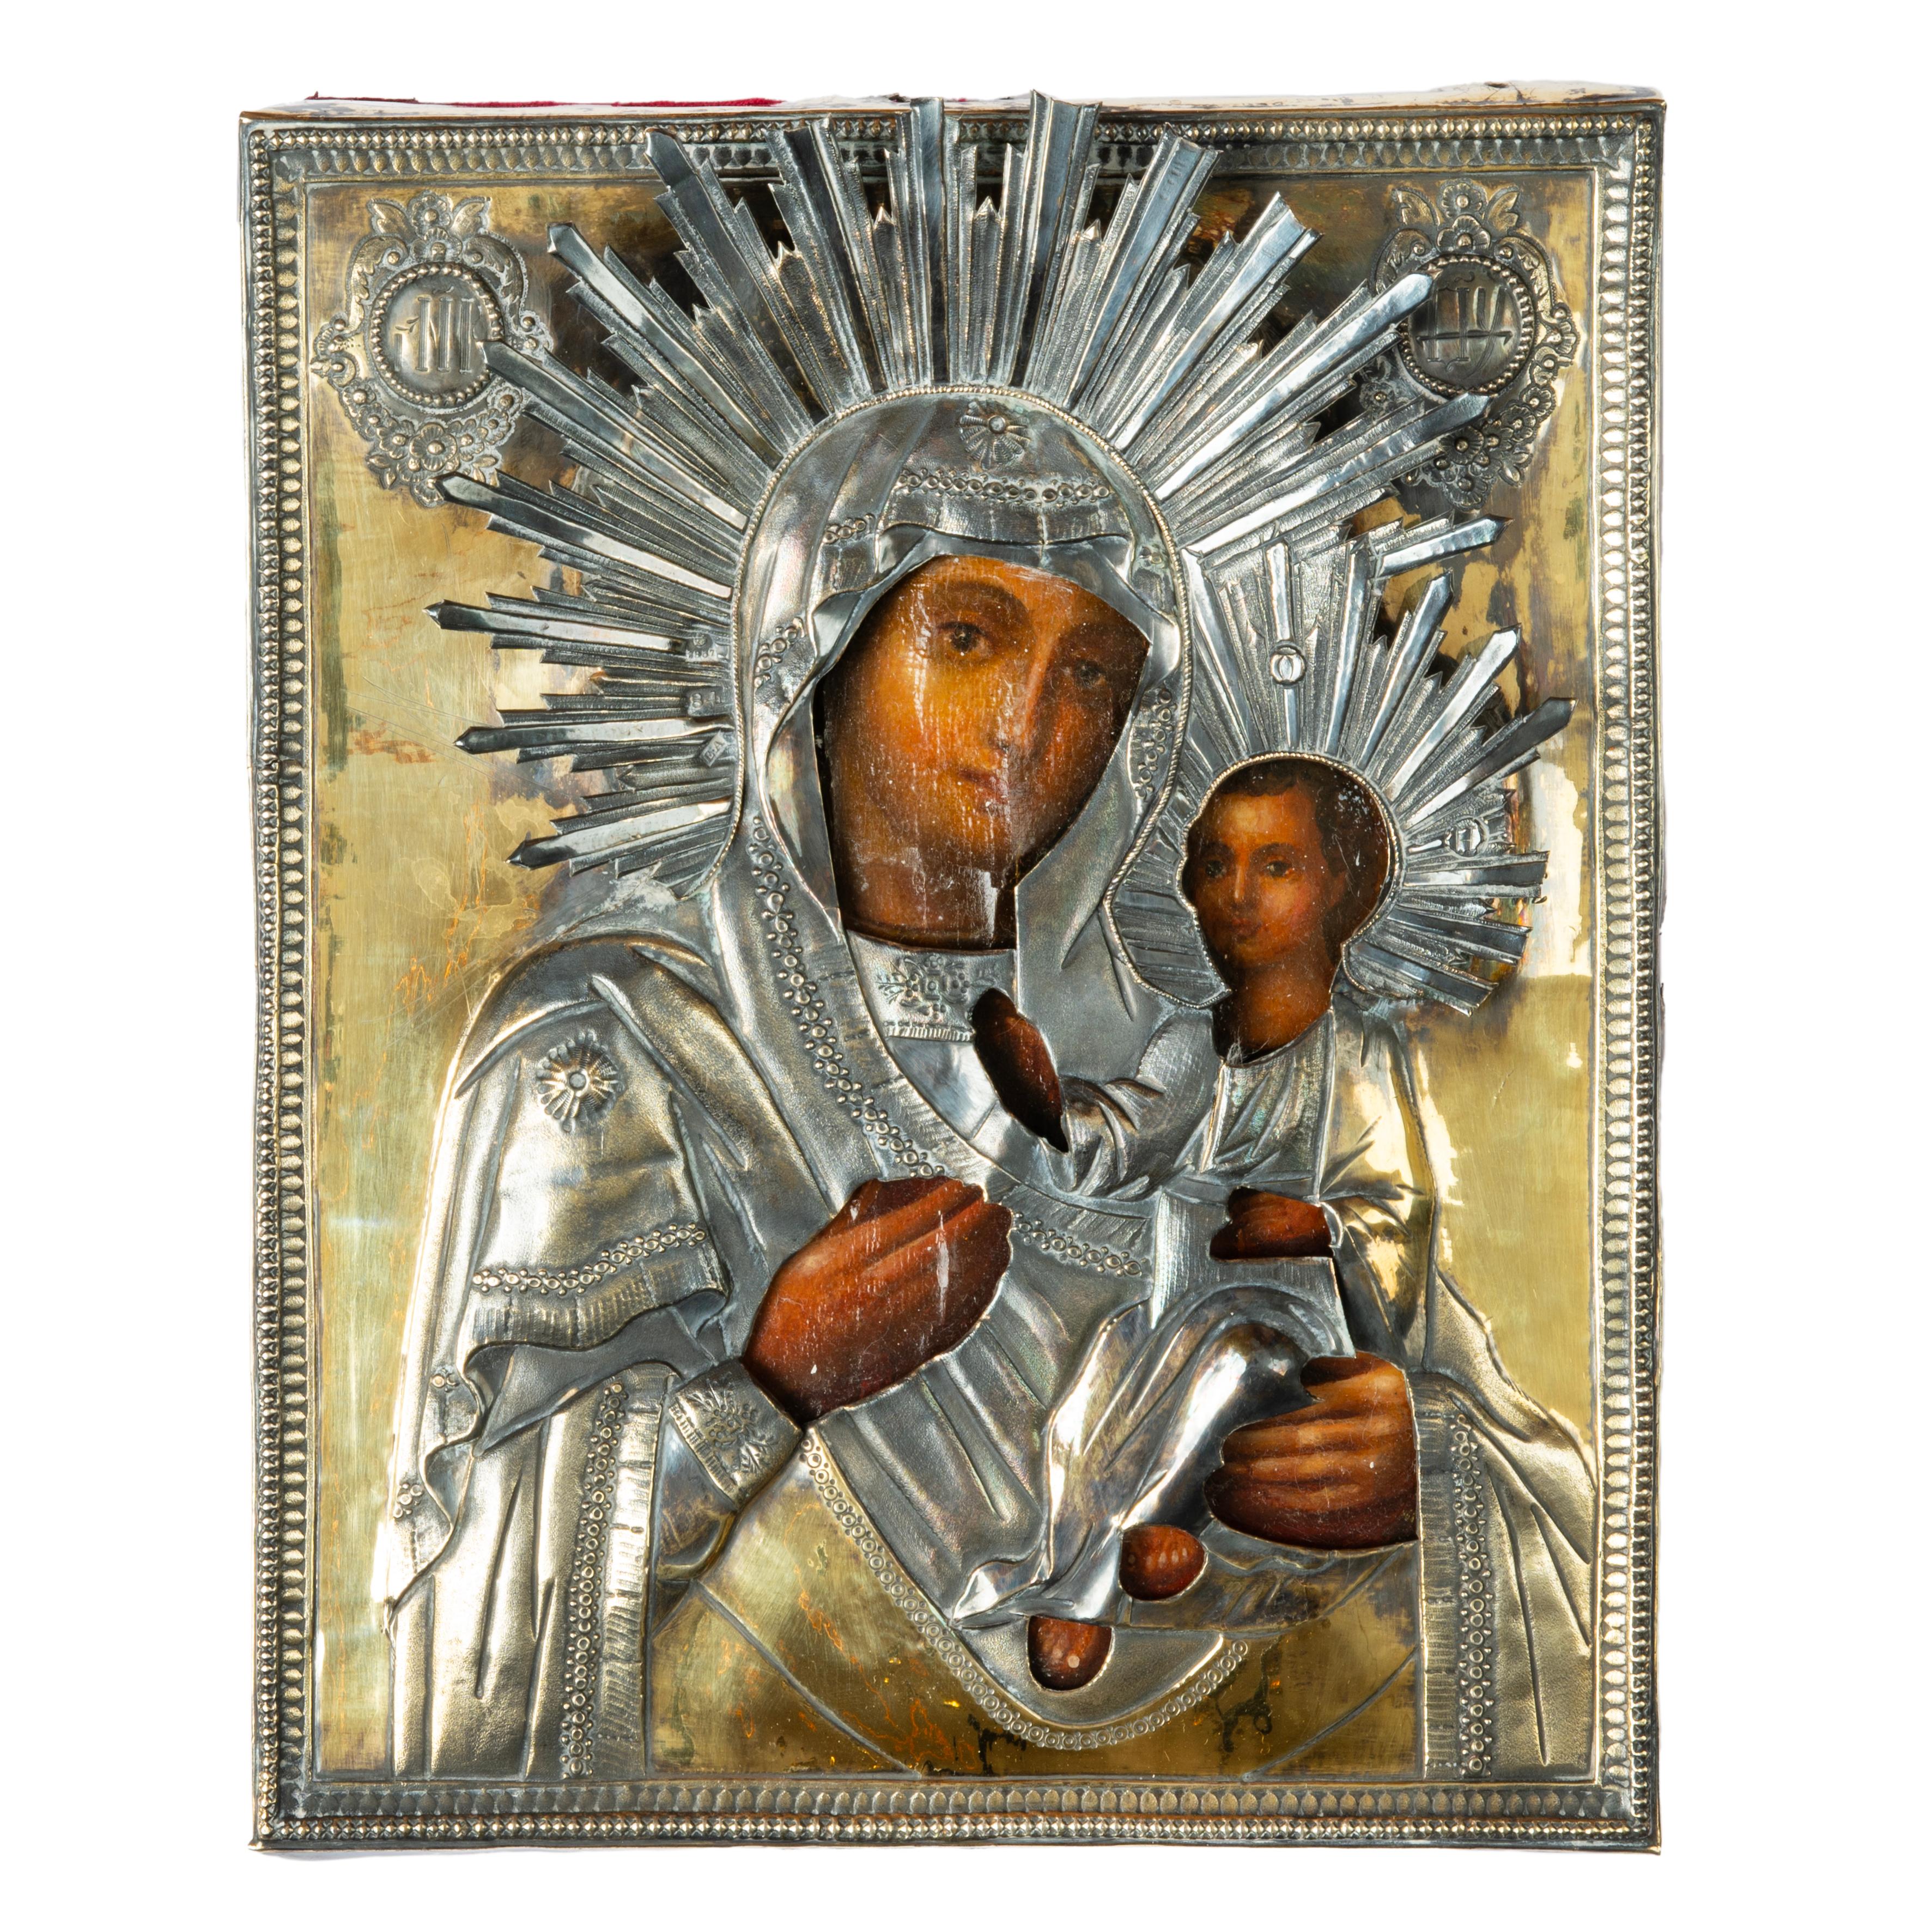 A beautiful Pushkin-era silver icon depicting the Tikvin Mother of God, covered with a silver-gilt oklad, with repoussé garments, veil and applied haloes of sunburst design. The Christ child seated to the Virgin’s left, his hand raised in blessing,